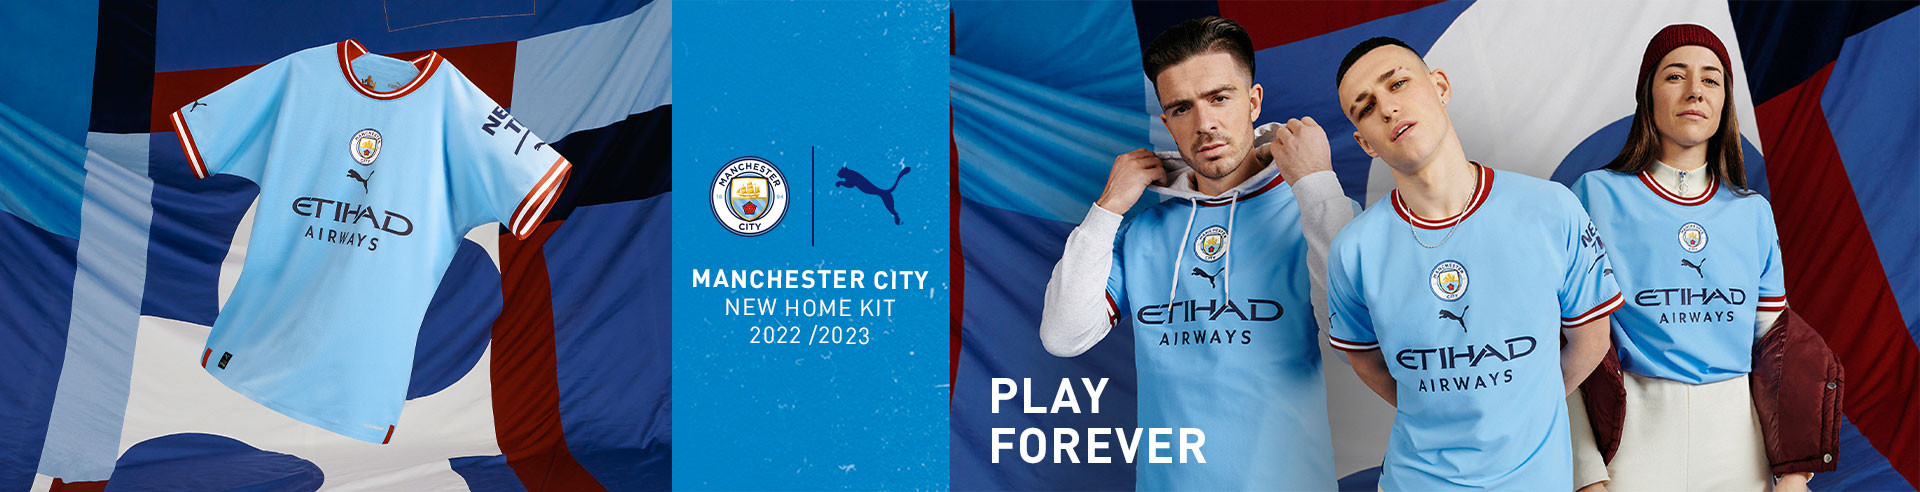 MANCHESTER CITY NEW HOME KIT 2022 20223 MAYO EN